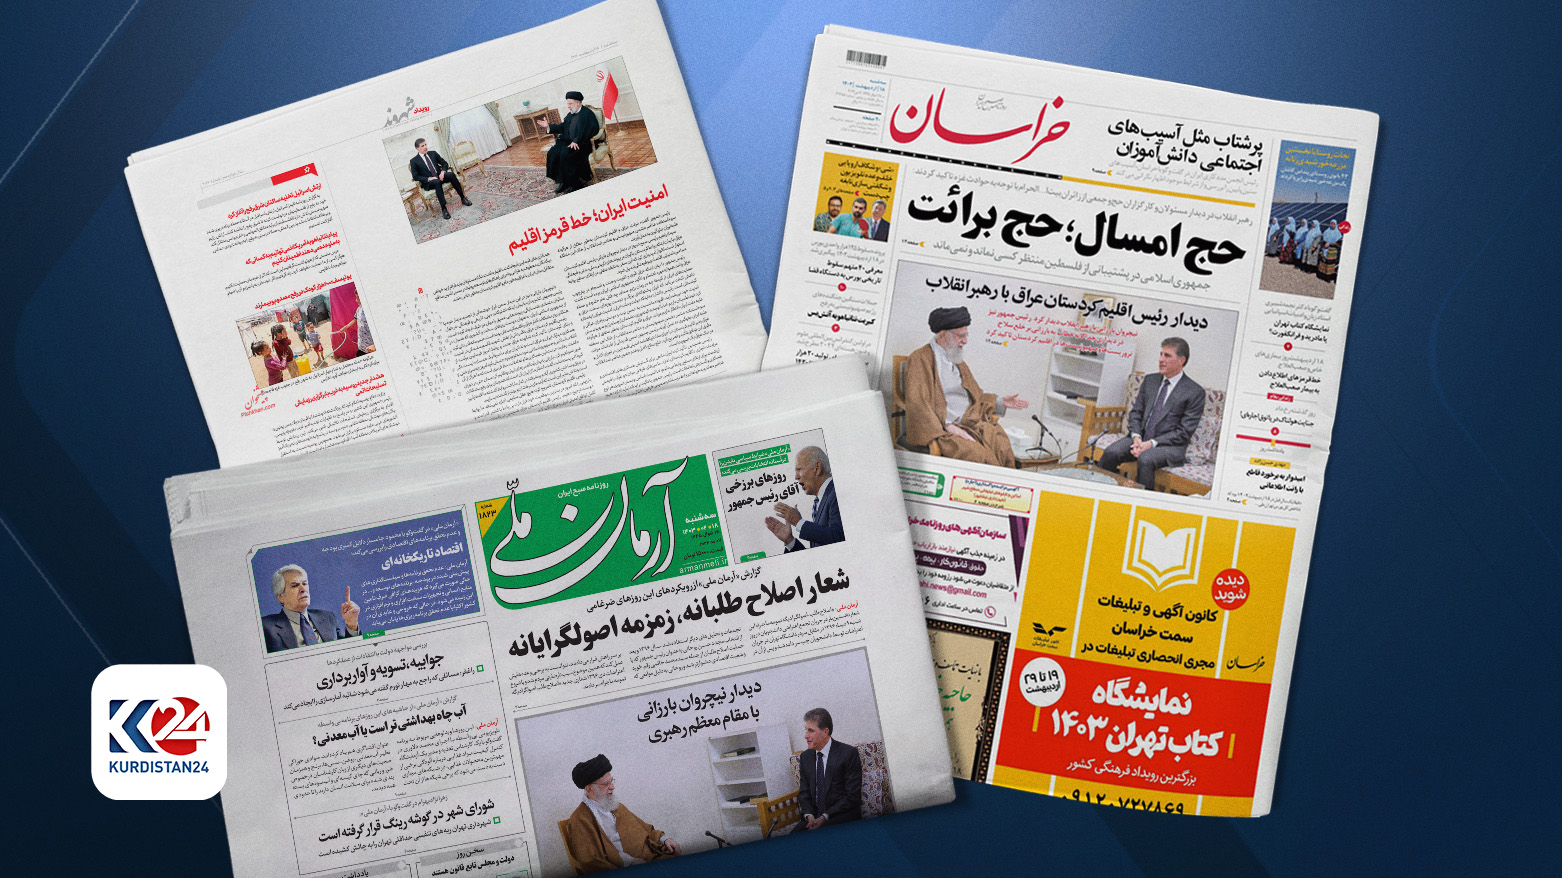 Some of the well-known Iranian newspapers. (Photo: Kurdistan 24)